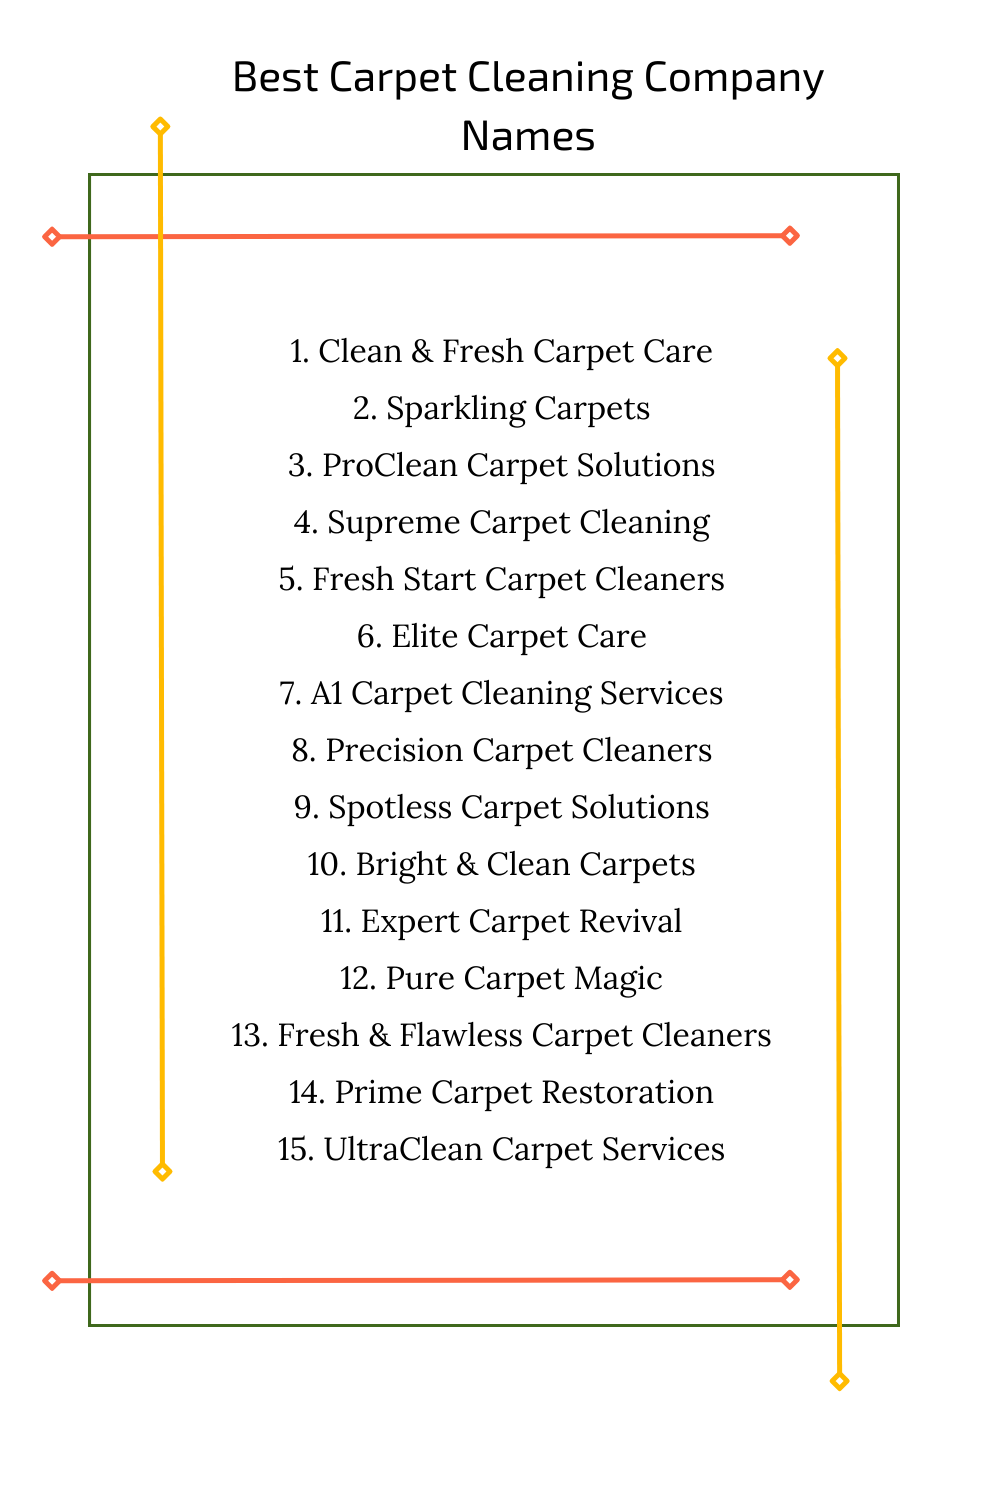 Best Carpet Cleaning Company Names